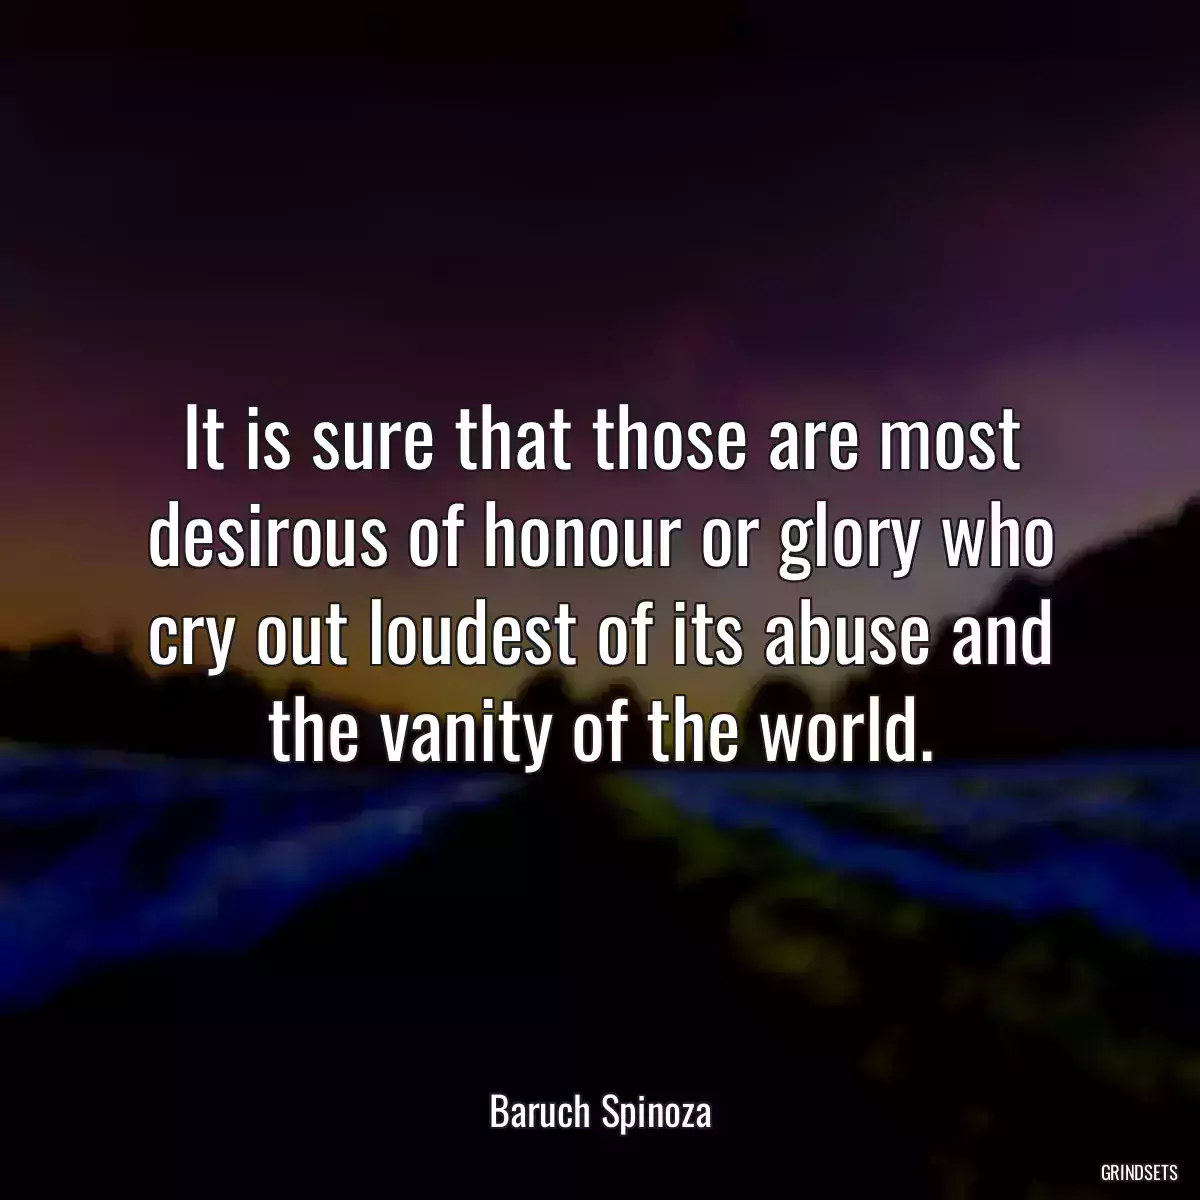 It is sure that those are most desirous of honour or glory who cry out loudest of its abuse and the vanity of the world.